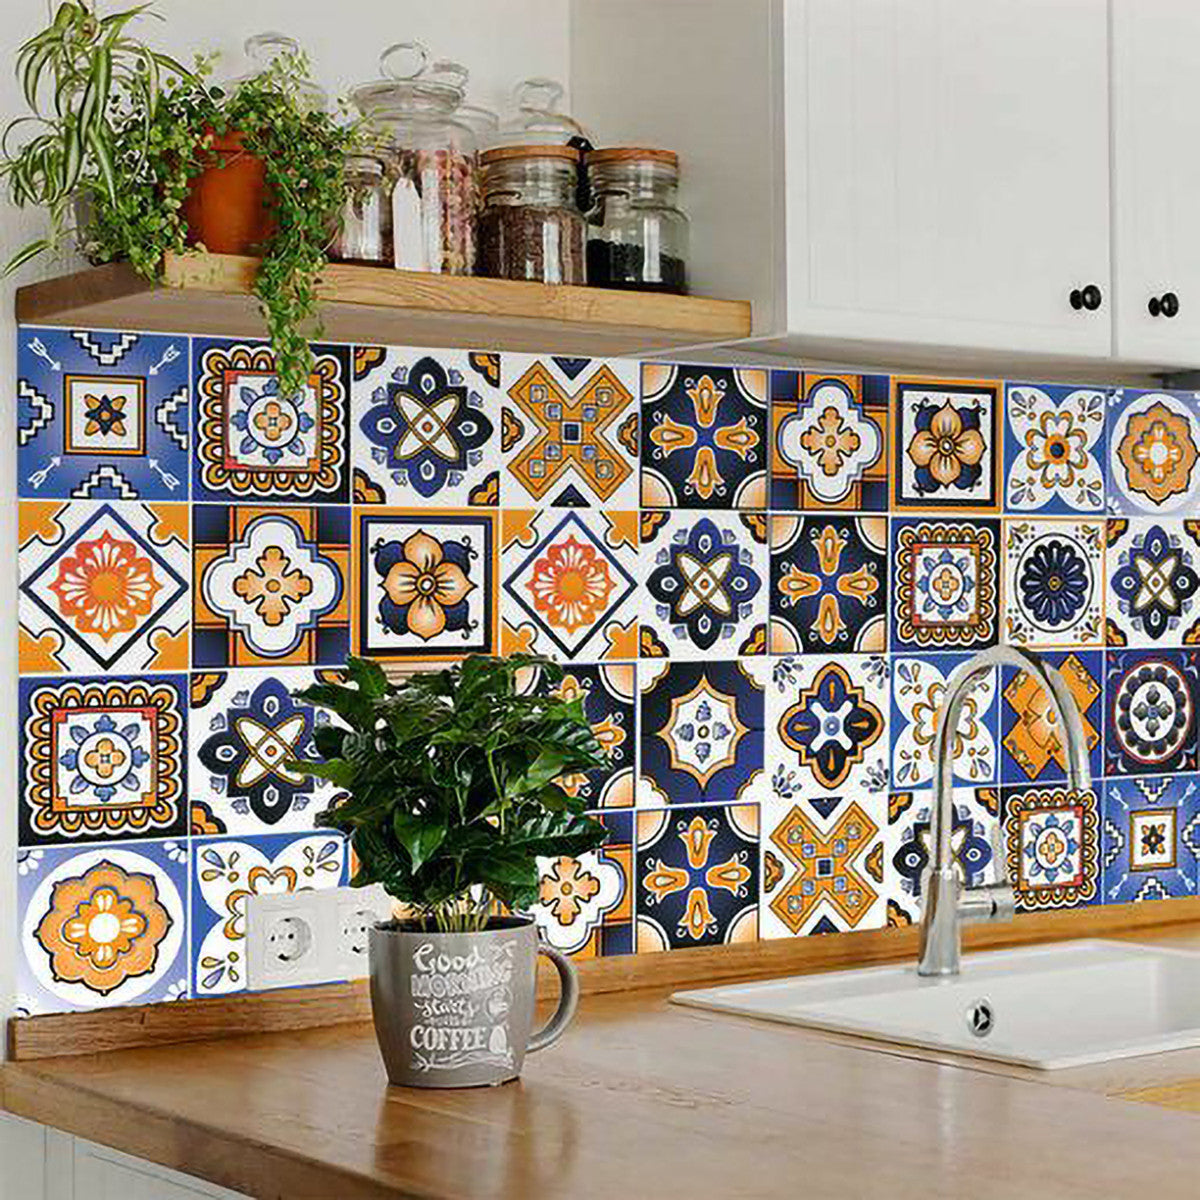 4" x 4" Shades of Blue and Yellow Mosaic Peel and Stick Removable Tiles